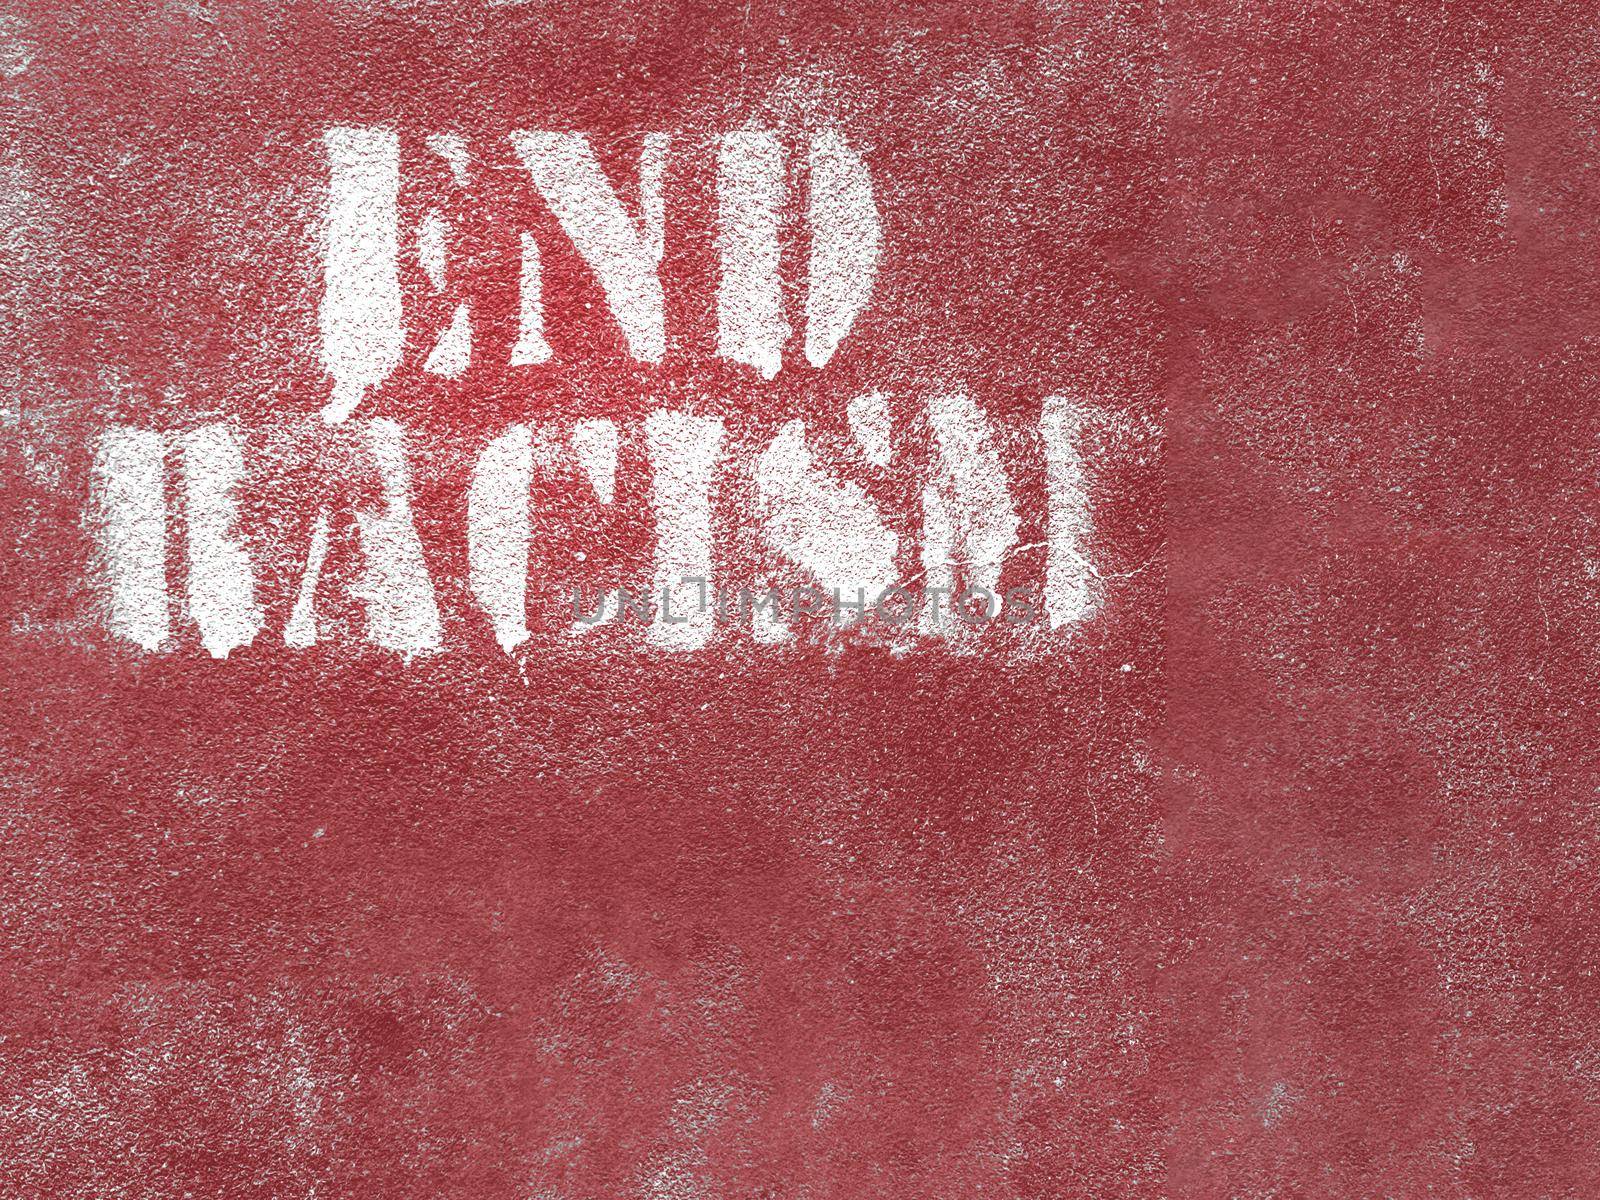 End racism message on wall by germanopoli